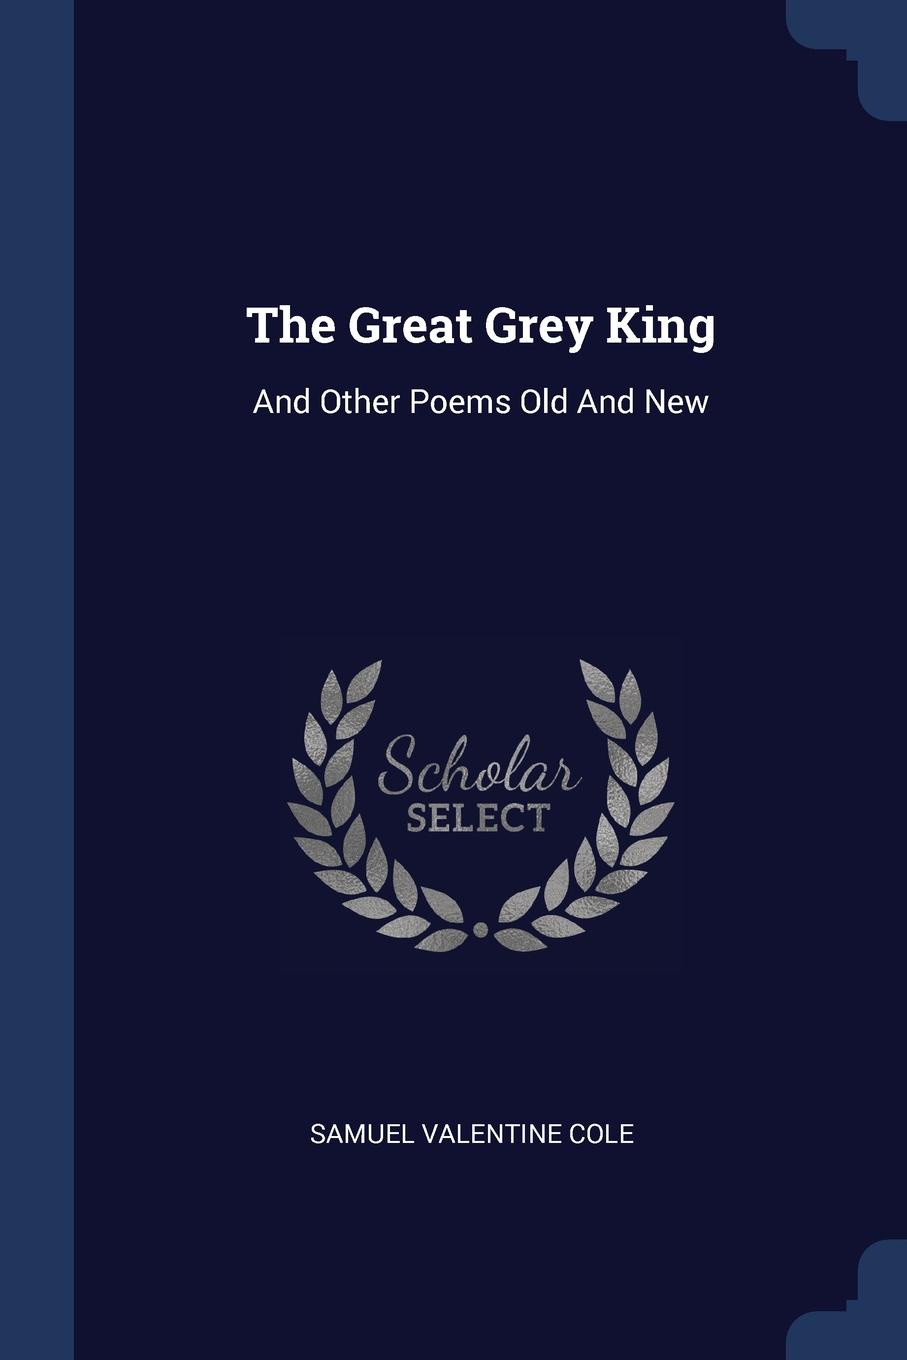 The Great Grey King. And Other Poems Old And New